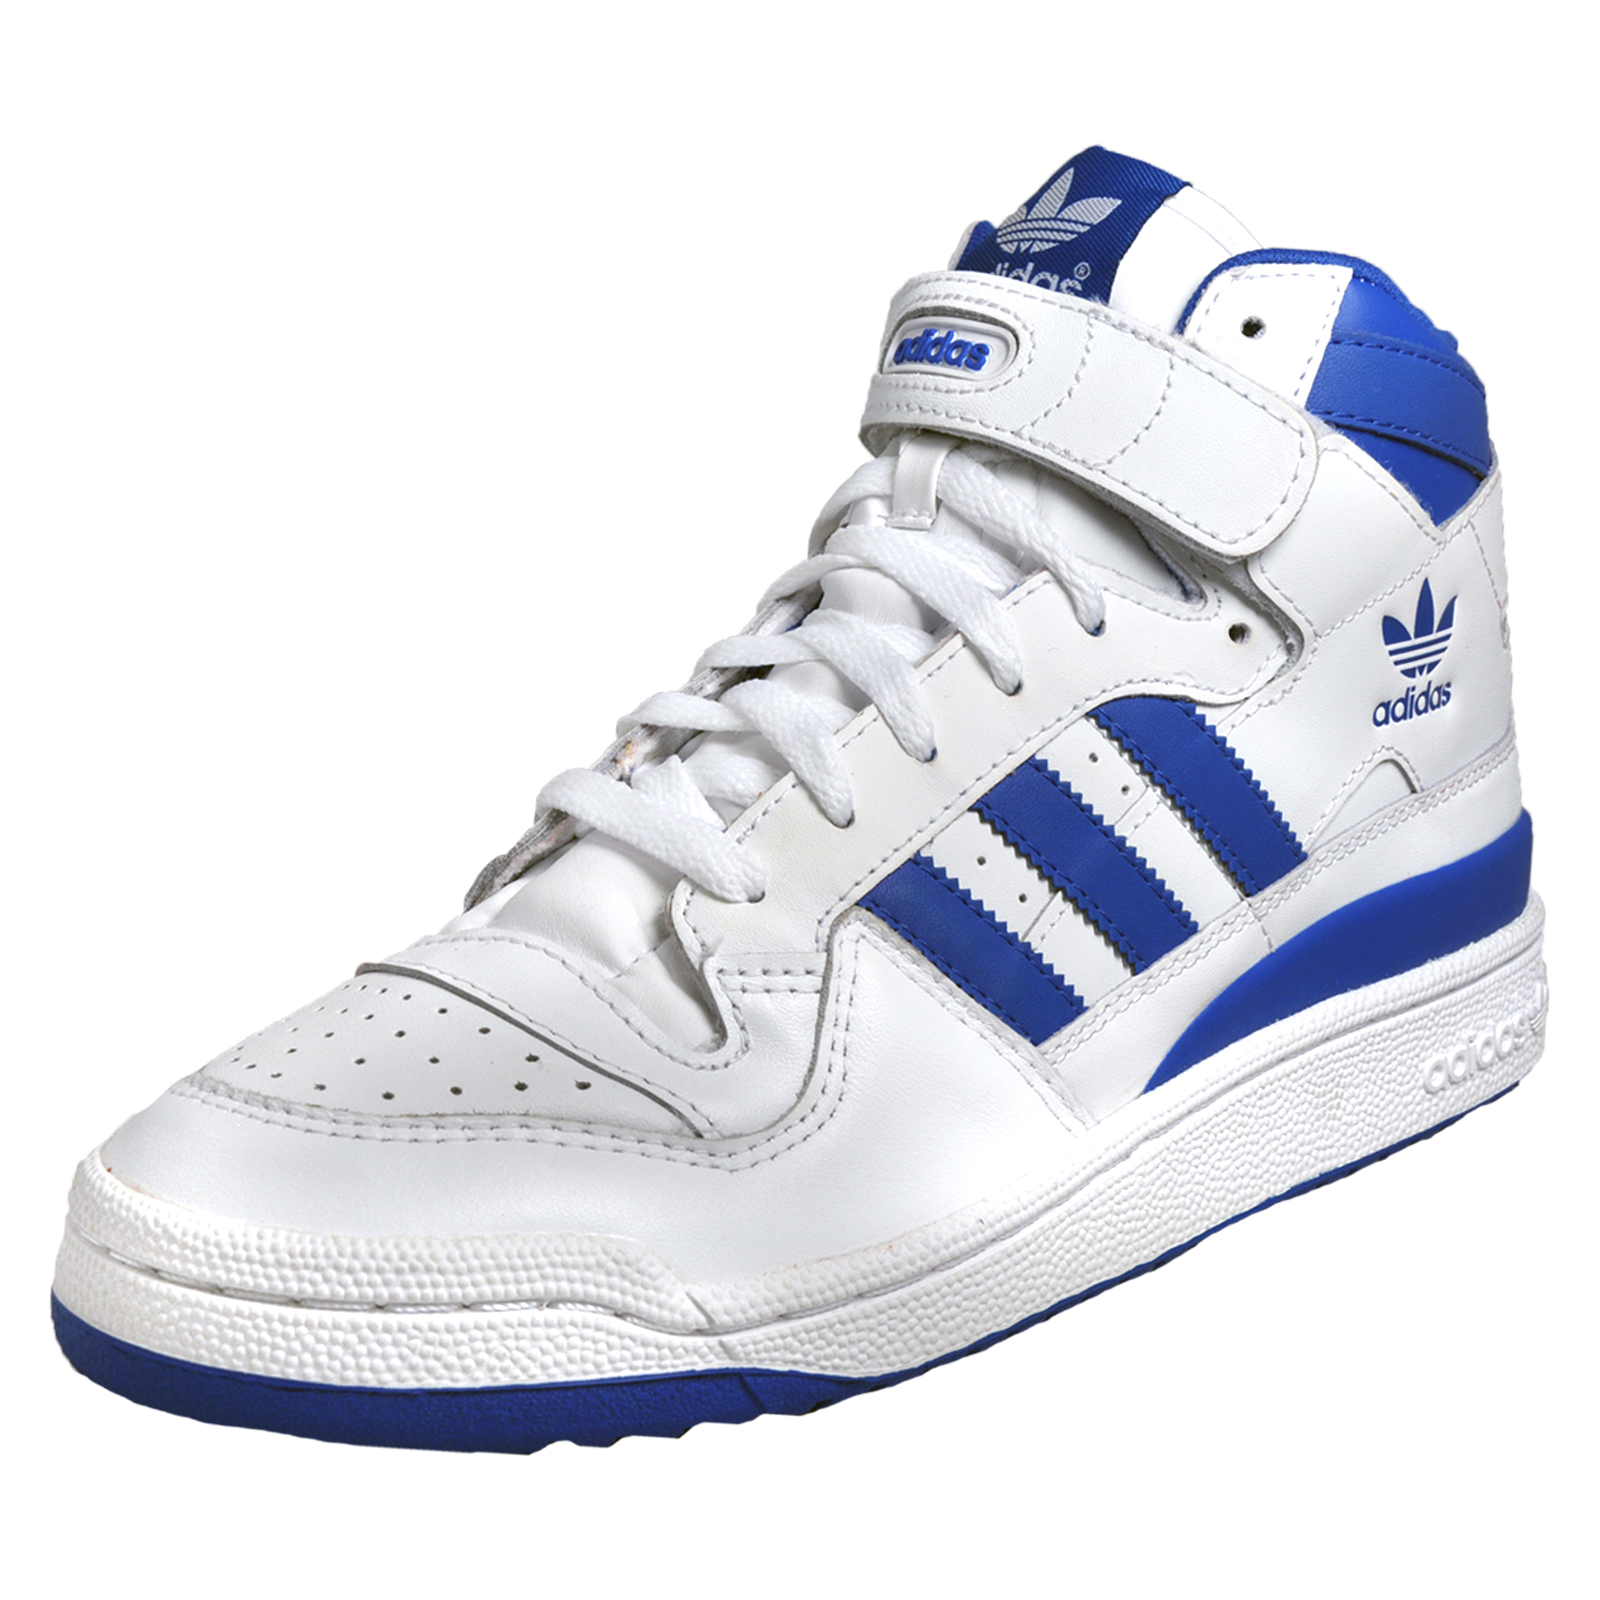 Adidas Originals Forum Mid Mens Basketball Shoes Casual Court Trainers